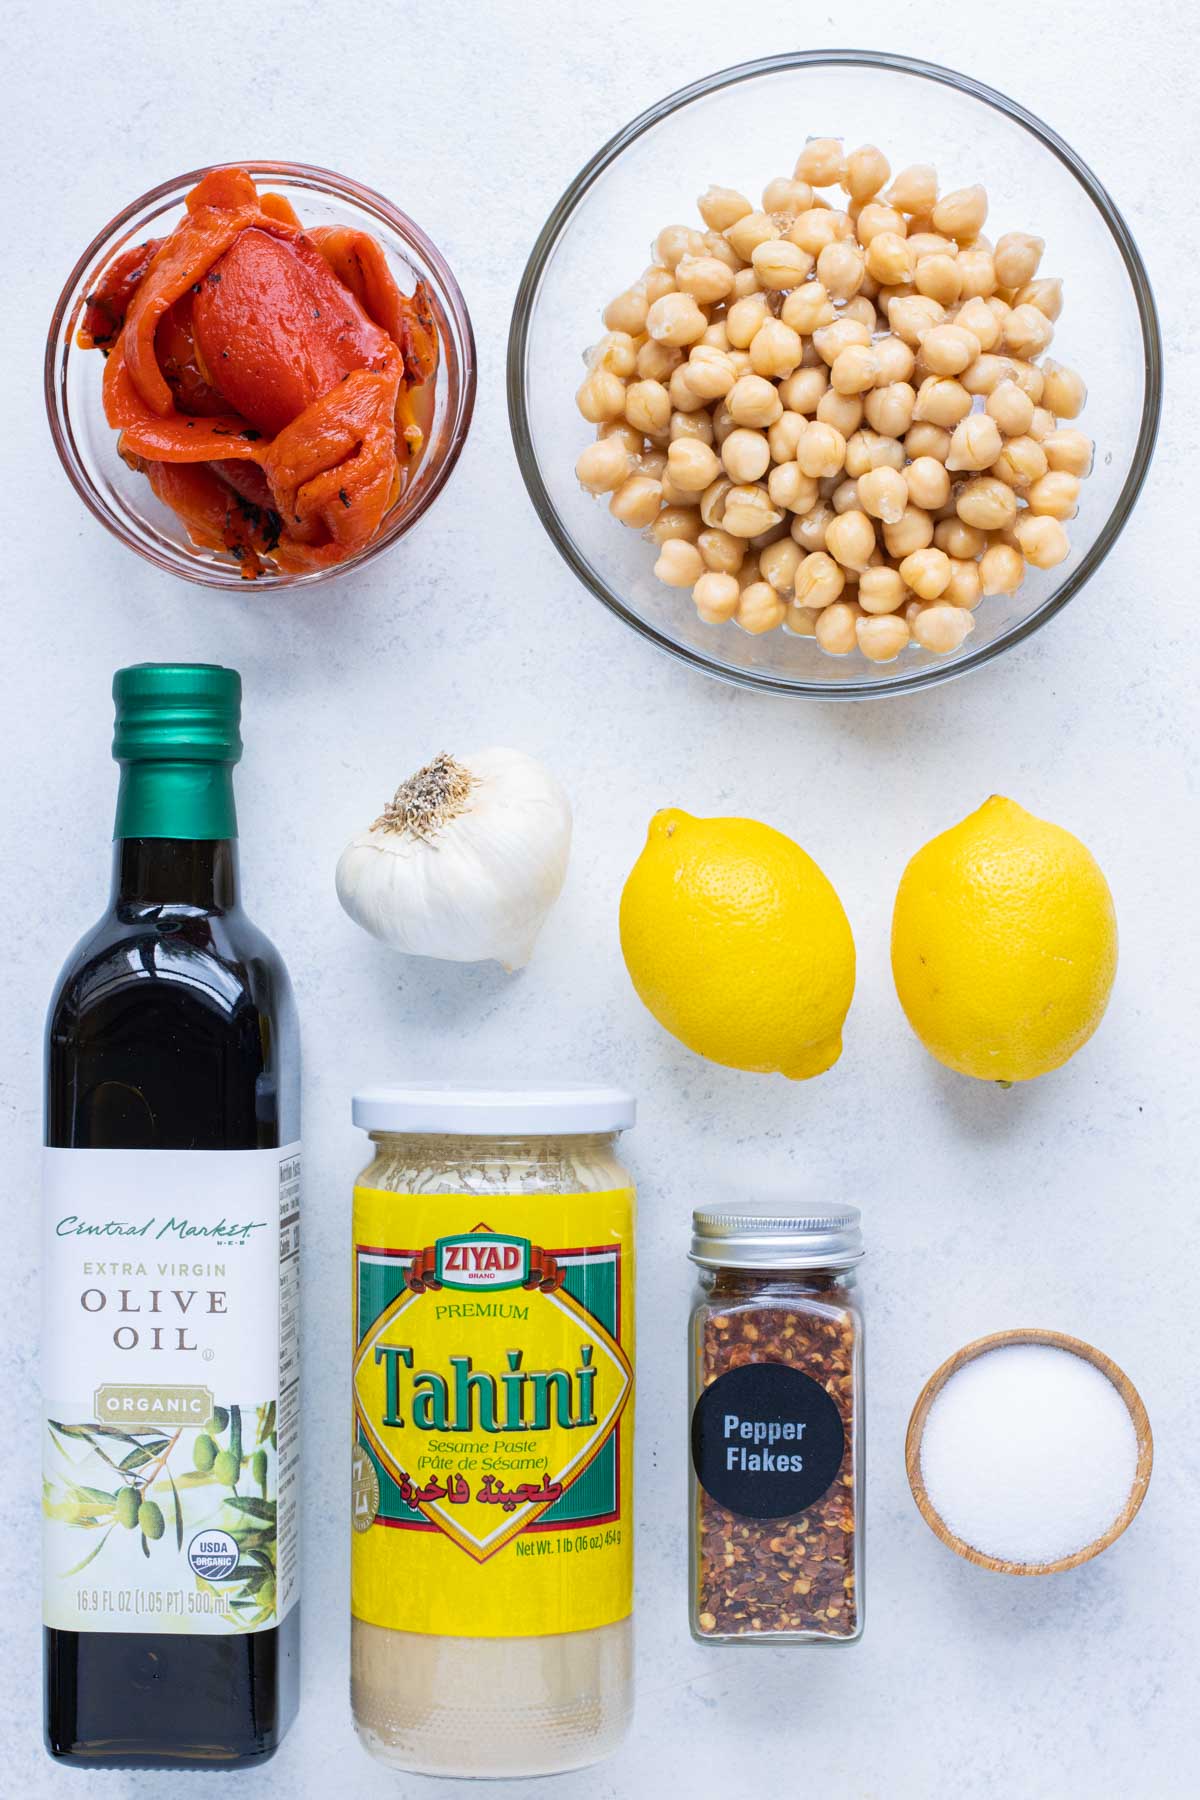 Chickpeas, roasted red peppers, tahini, olive oil, lemons, garlic, and seasoning are the ingredients for this recipe.